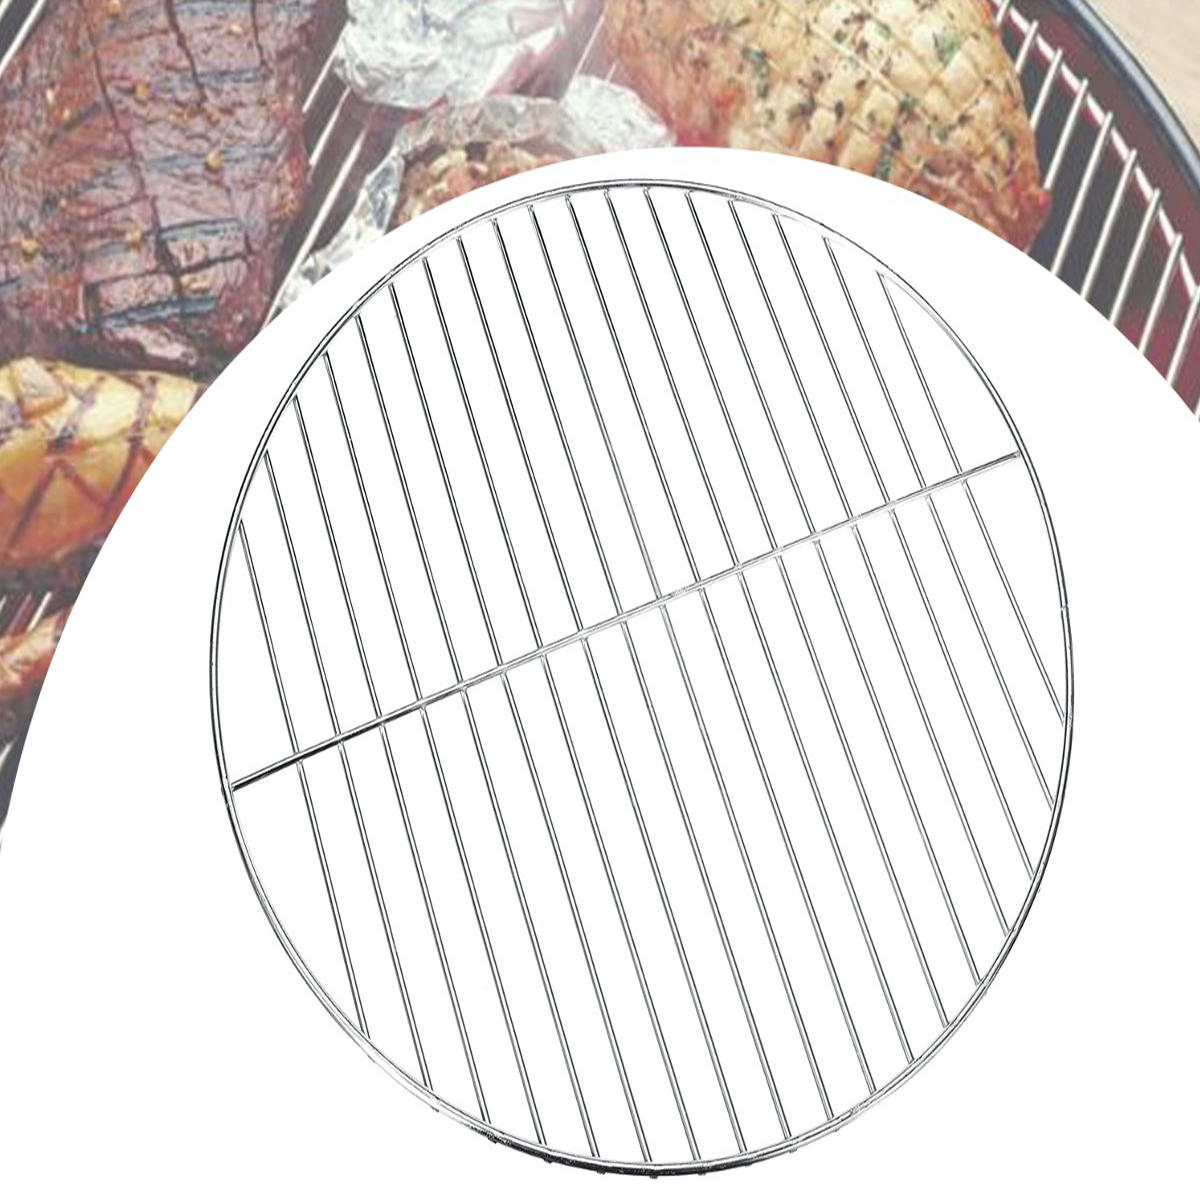 25 cm Ronde BBQ Grill Rooster Houtskool BBQ Grill Pan Vervanging Metalen Koken Barbecue Mesh Frame